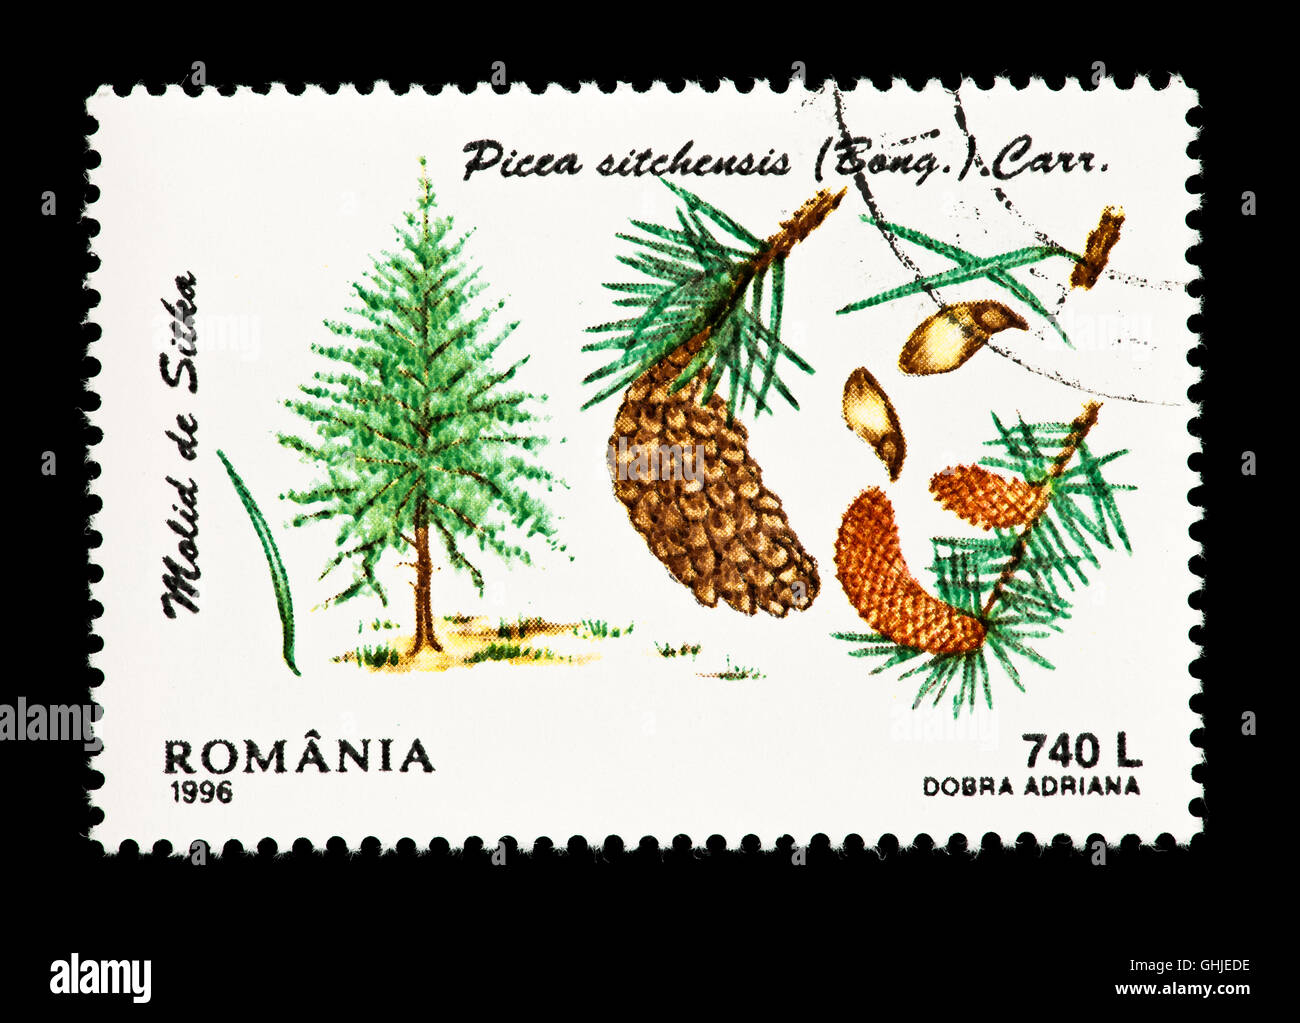 Postage stamp from Romania depicting Sitka spruce (Picea stichensis), tree, needles, cones and seeds. Stock Photo